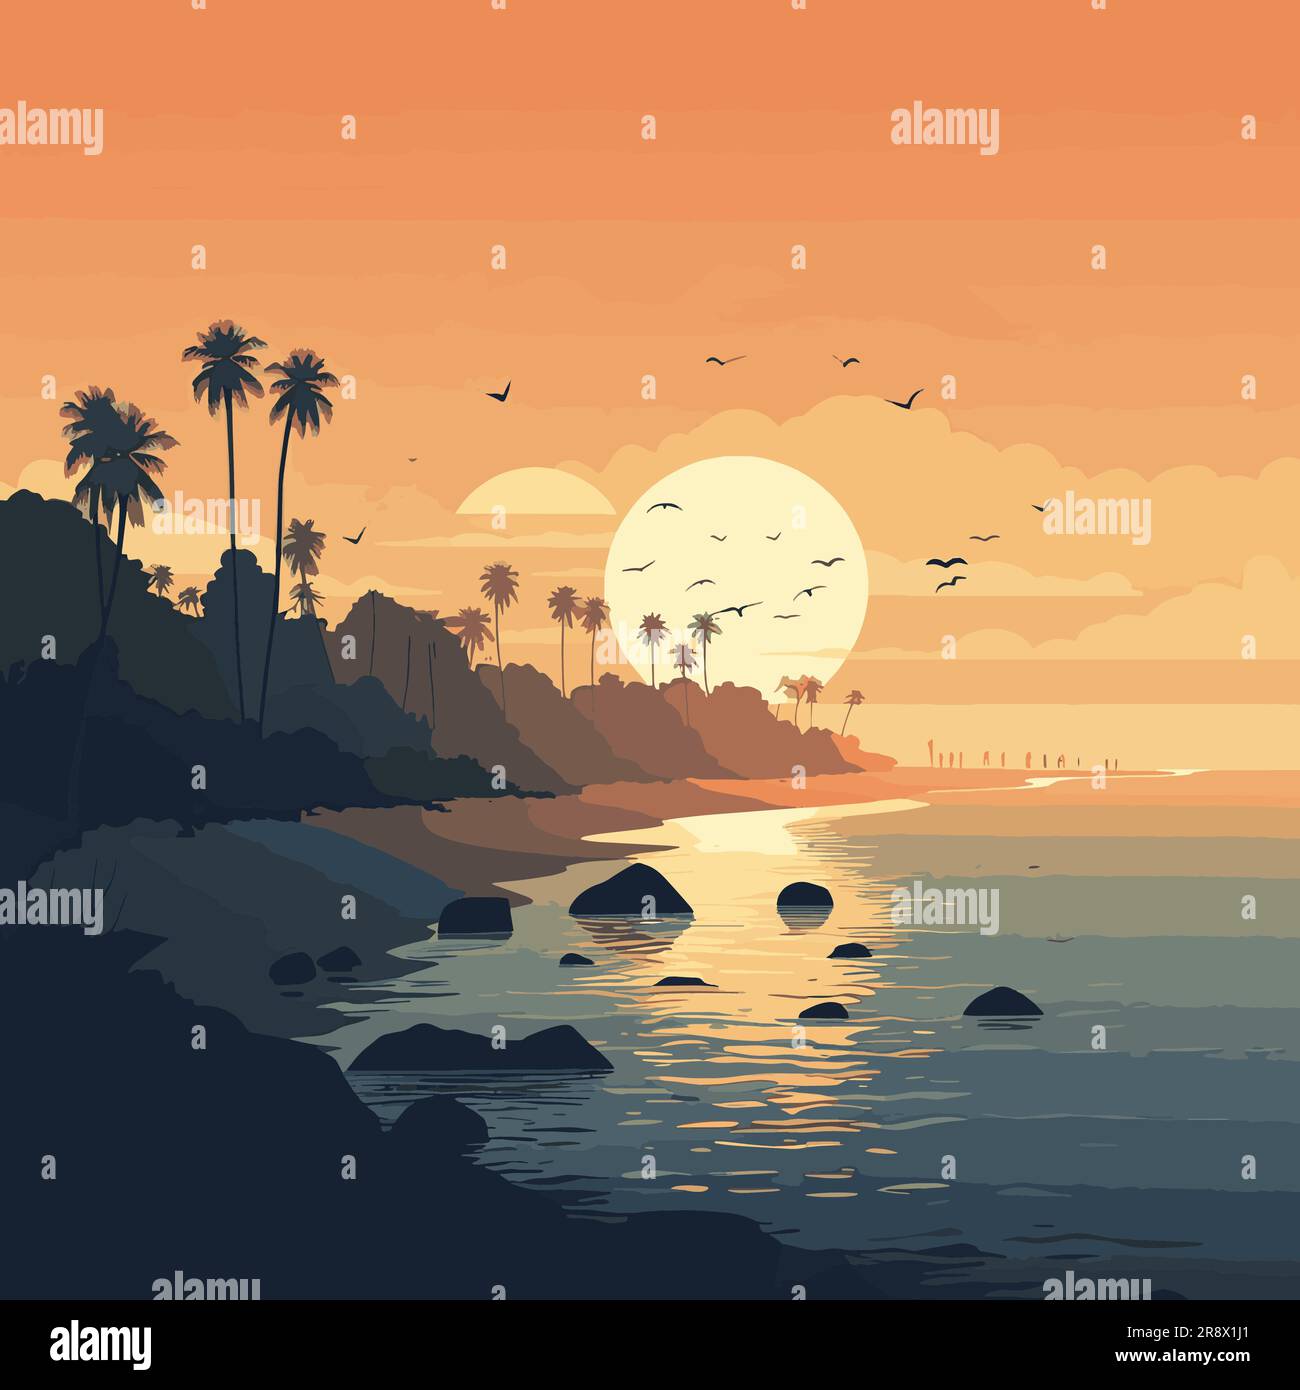 Vector illustration with a simple beautiful seascape with palms, beach and ocean in the background Stock Vector